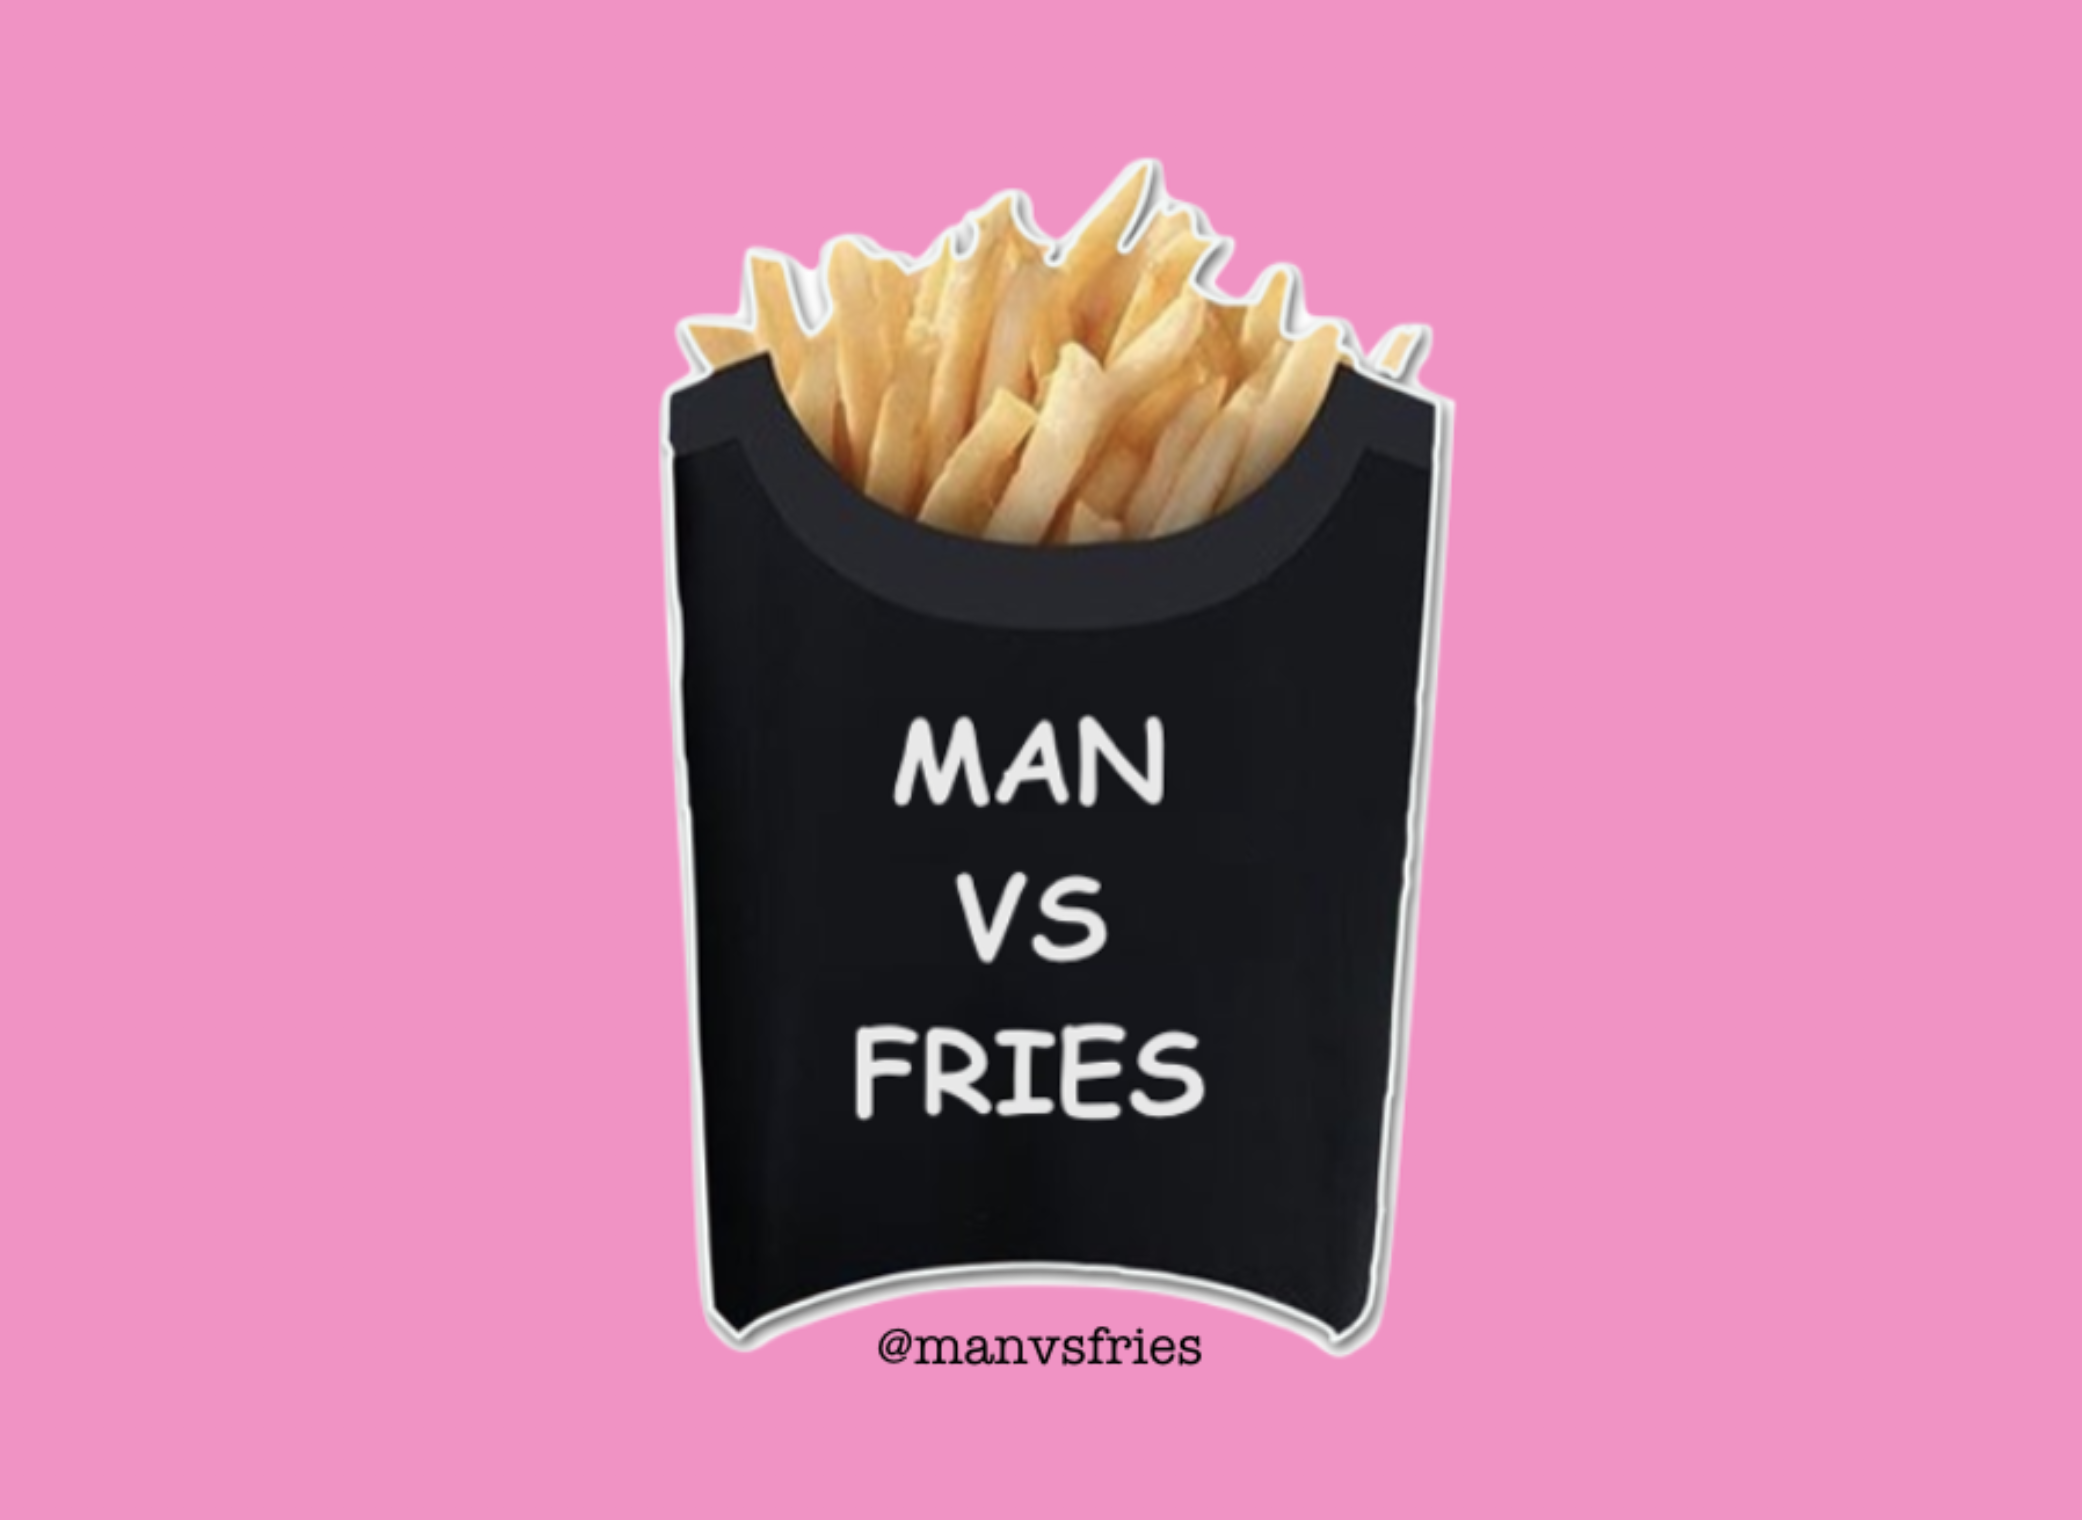 The logo or business face of "Man vs Fries"